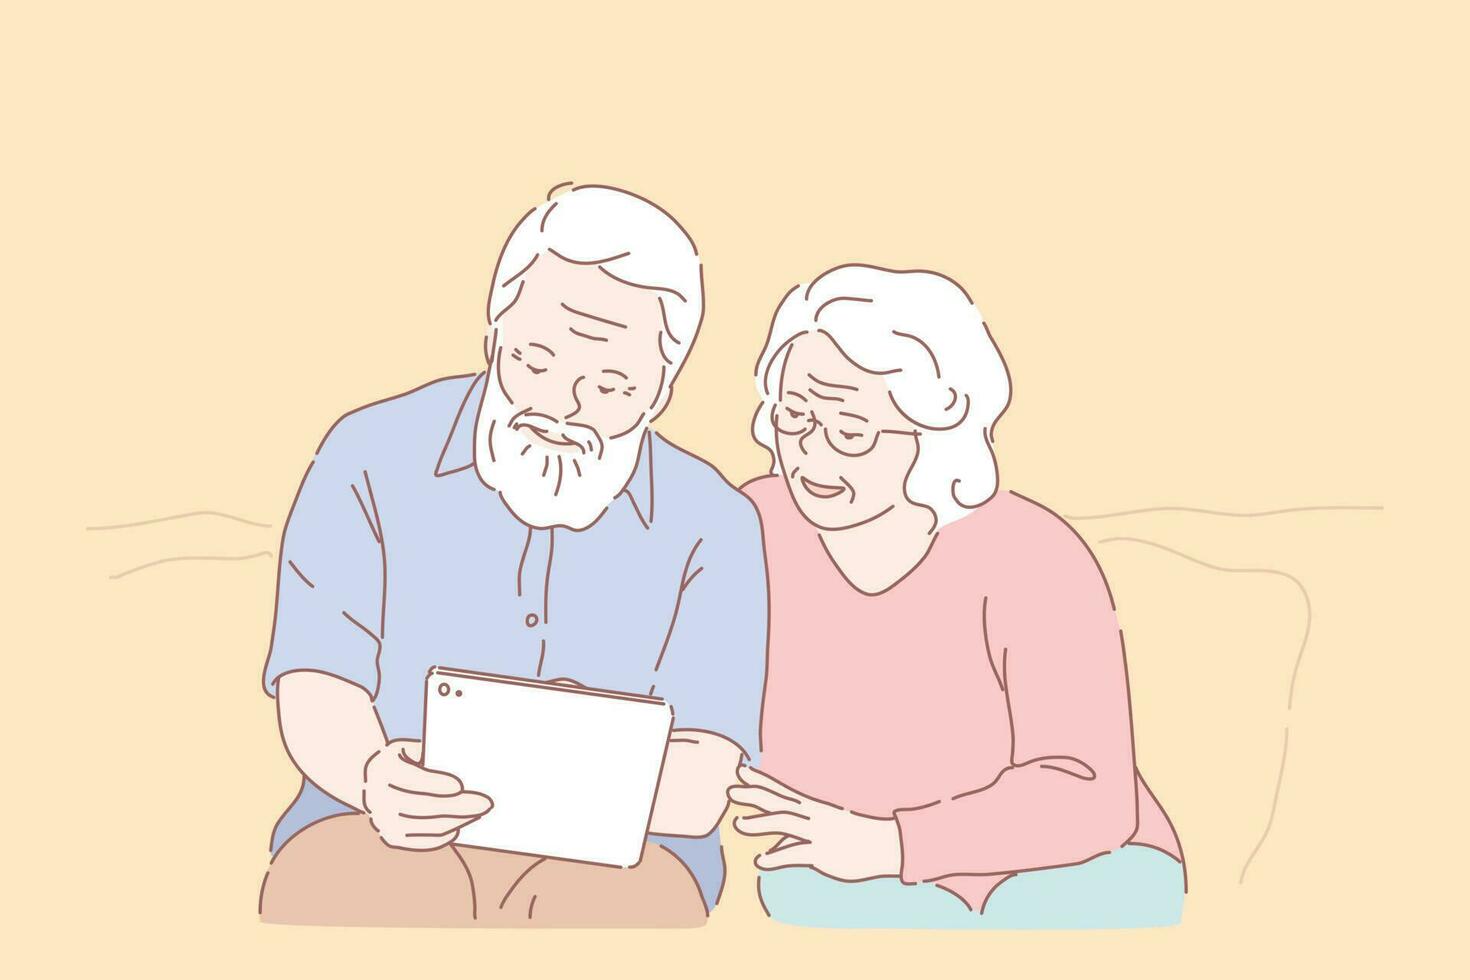 Studying tablet by elderly people concept vector